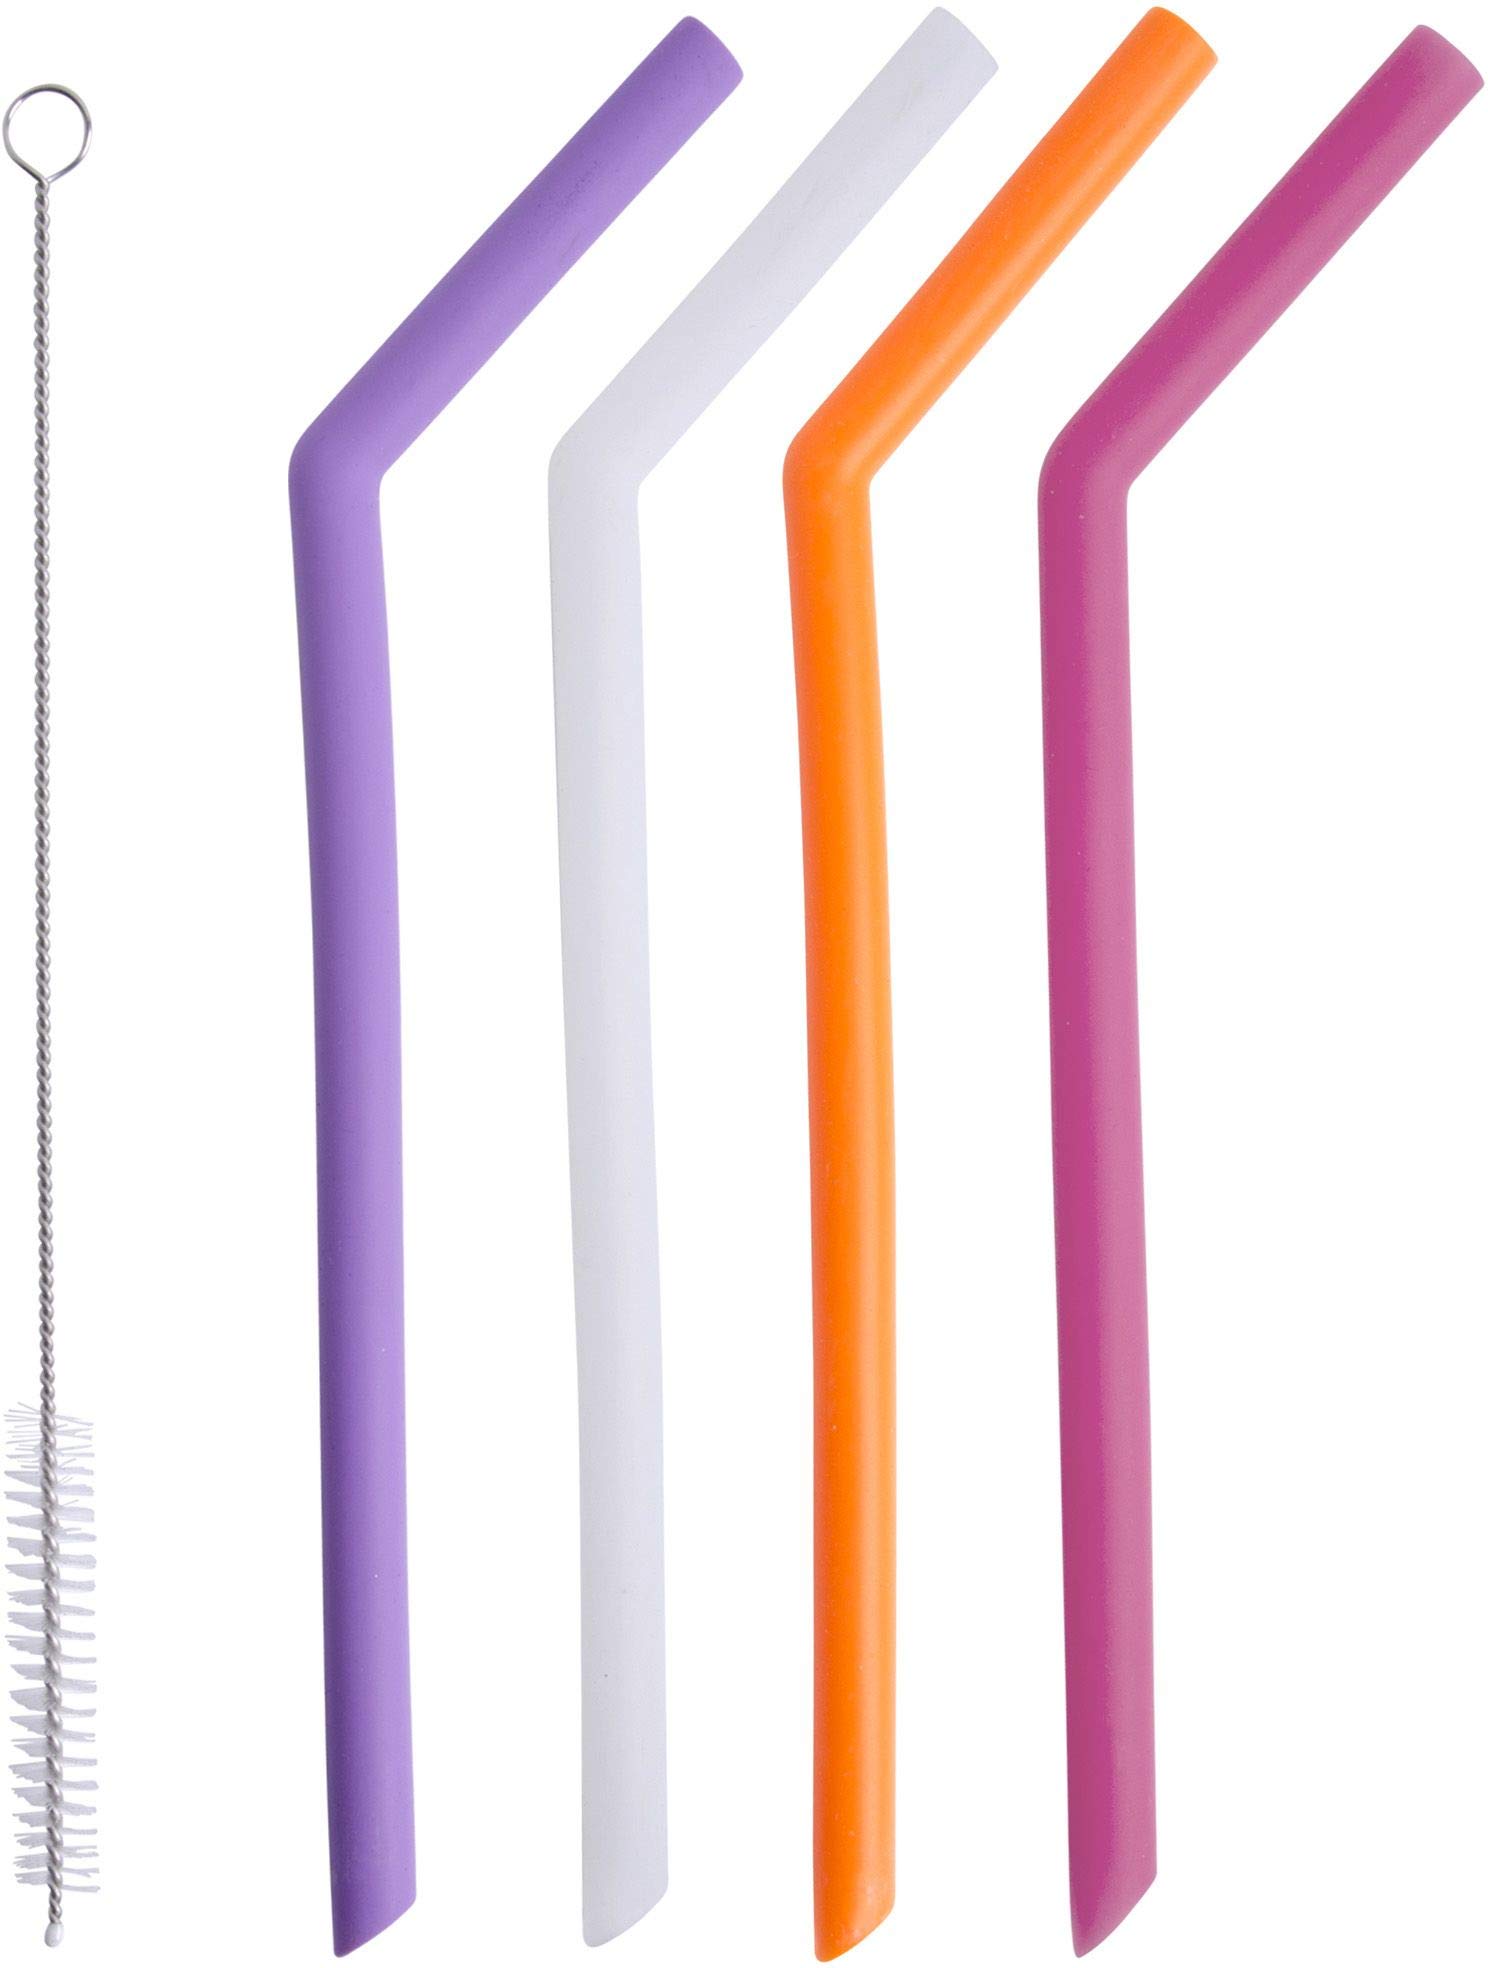 Home Essentials 87857 Set of 4 Silicone Wide Bent Straws with Brush (Sunset)